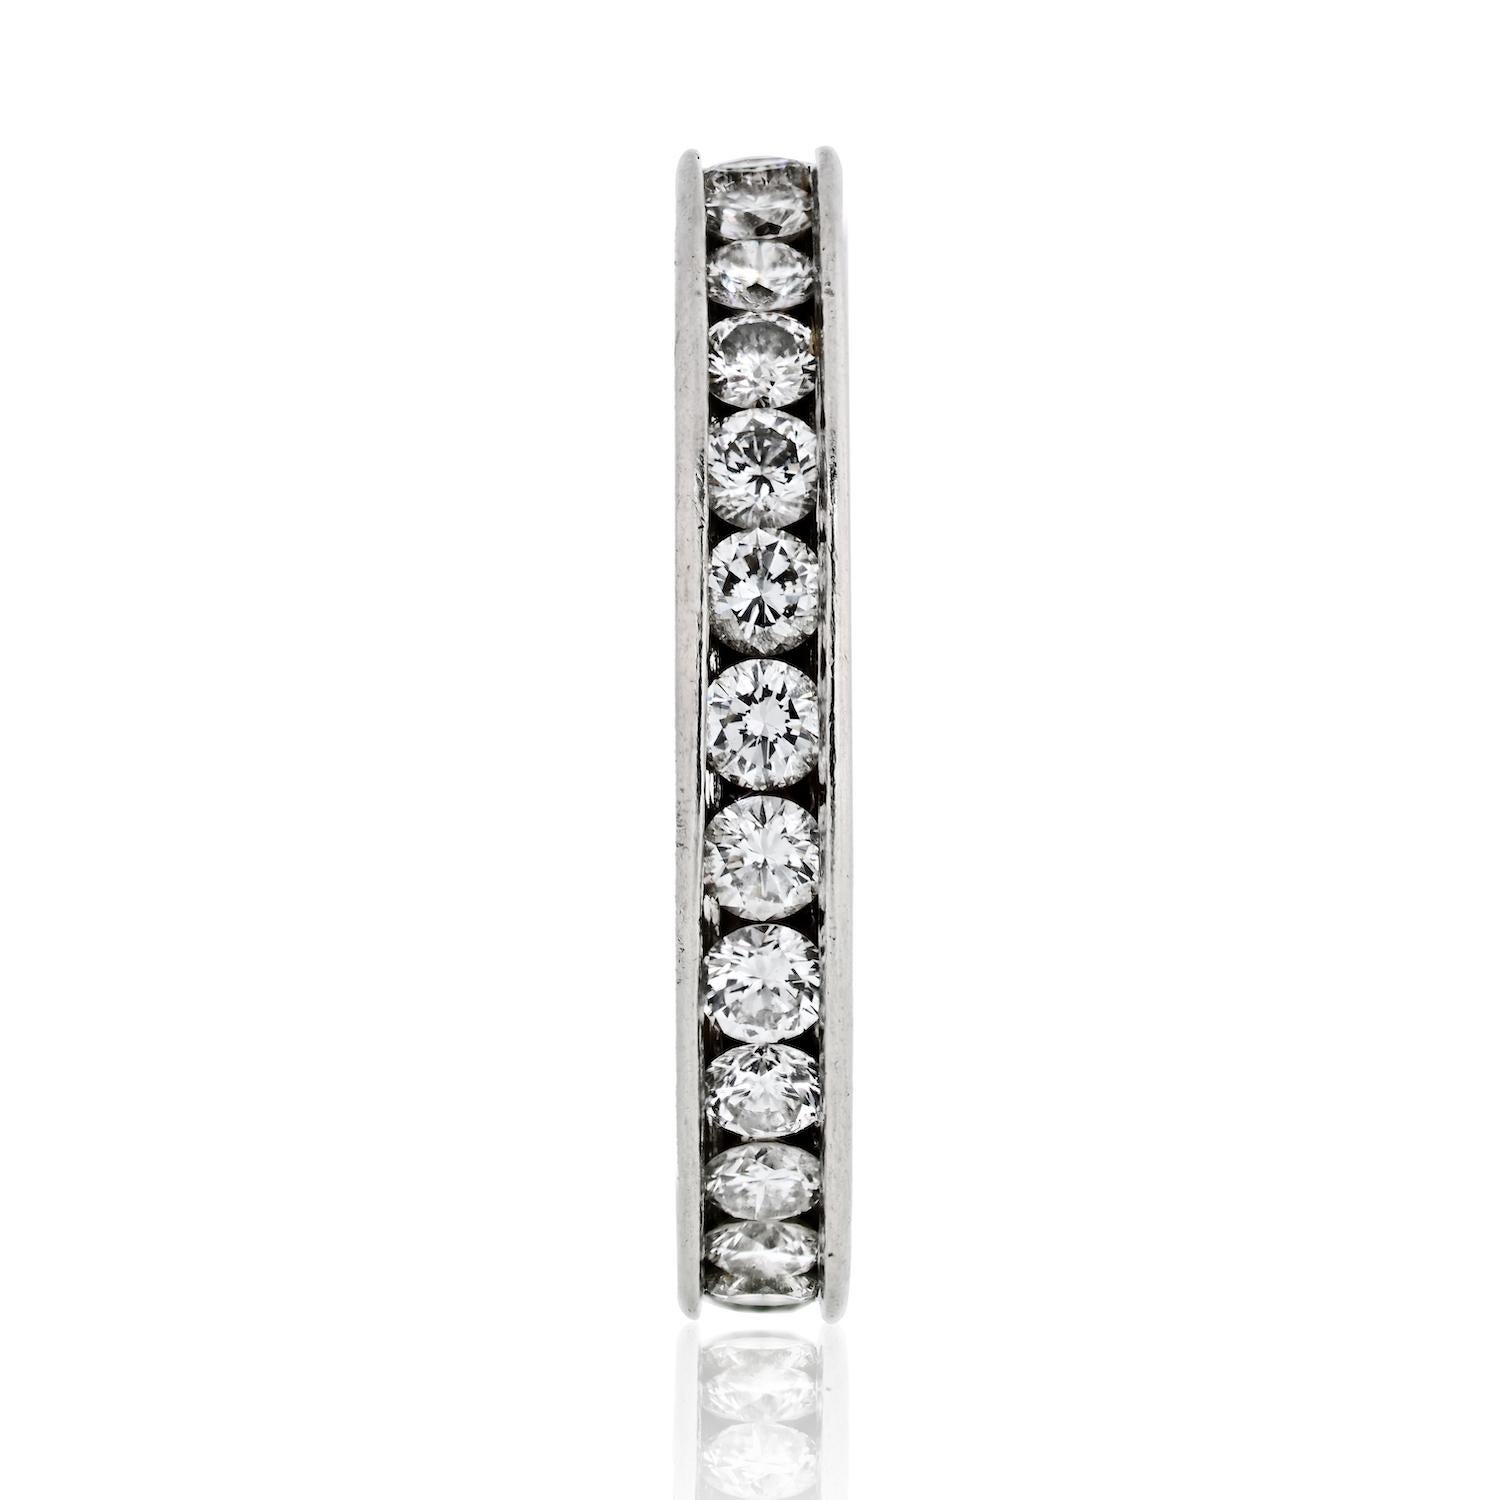 Cartier platinum diamond eternity band mounted with round cut diamonds of superb quality.
Ring Width: 3.4mm
Setting: Channel low set
Comes with Cartier box.
Size: 8
Will lightly buff and polish before shipping